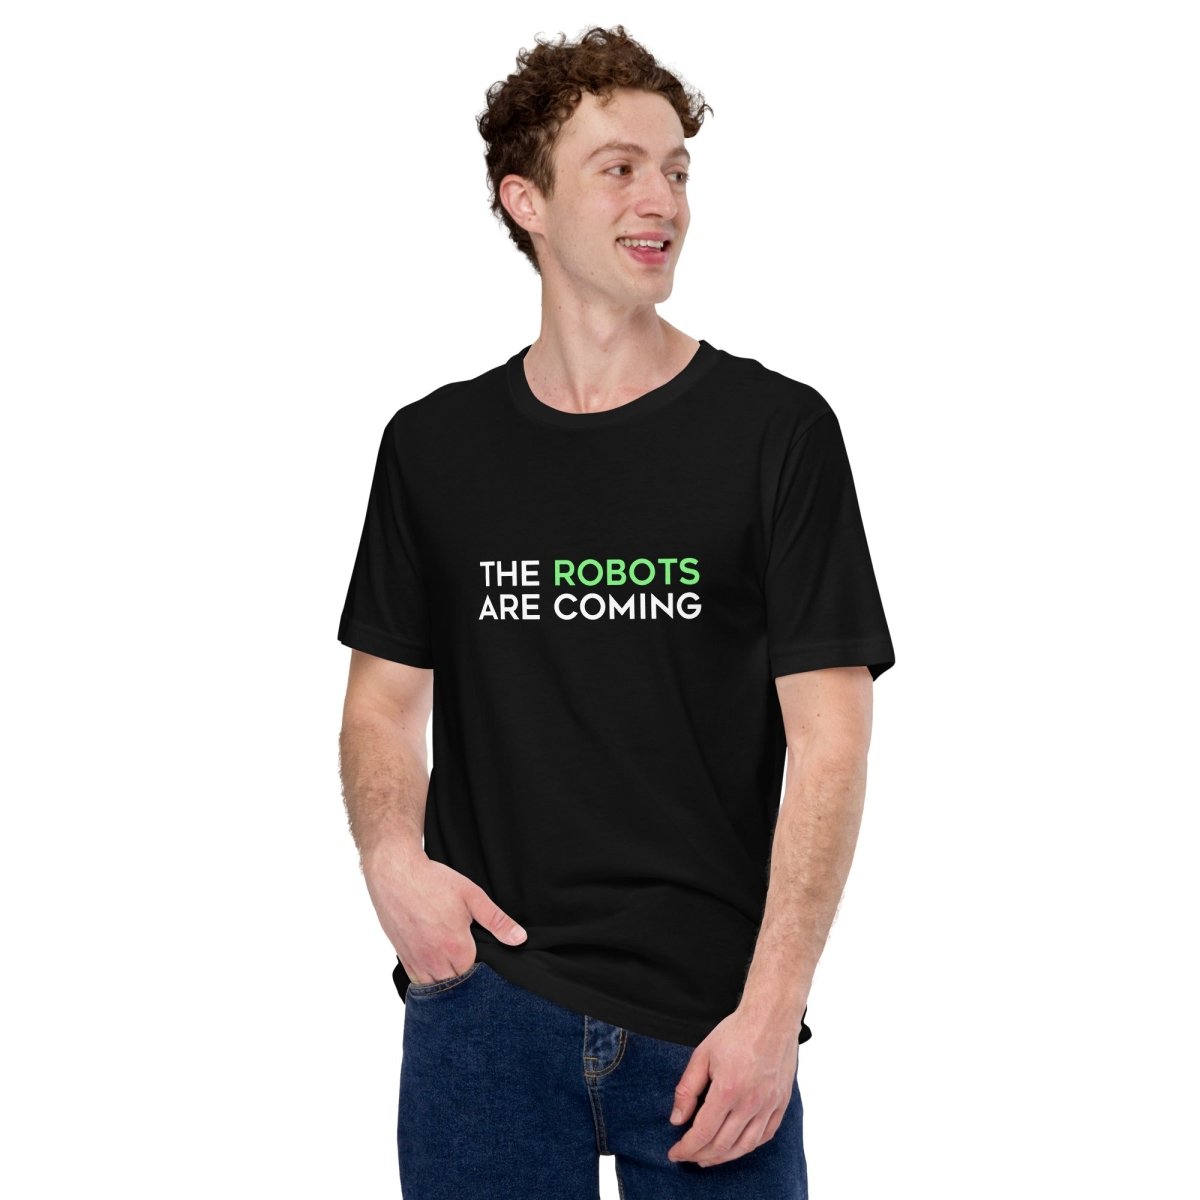 The Robots Are Coming (Green) T - Shirt 1 (unisex) - Black - AI Store